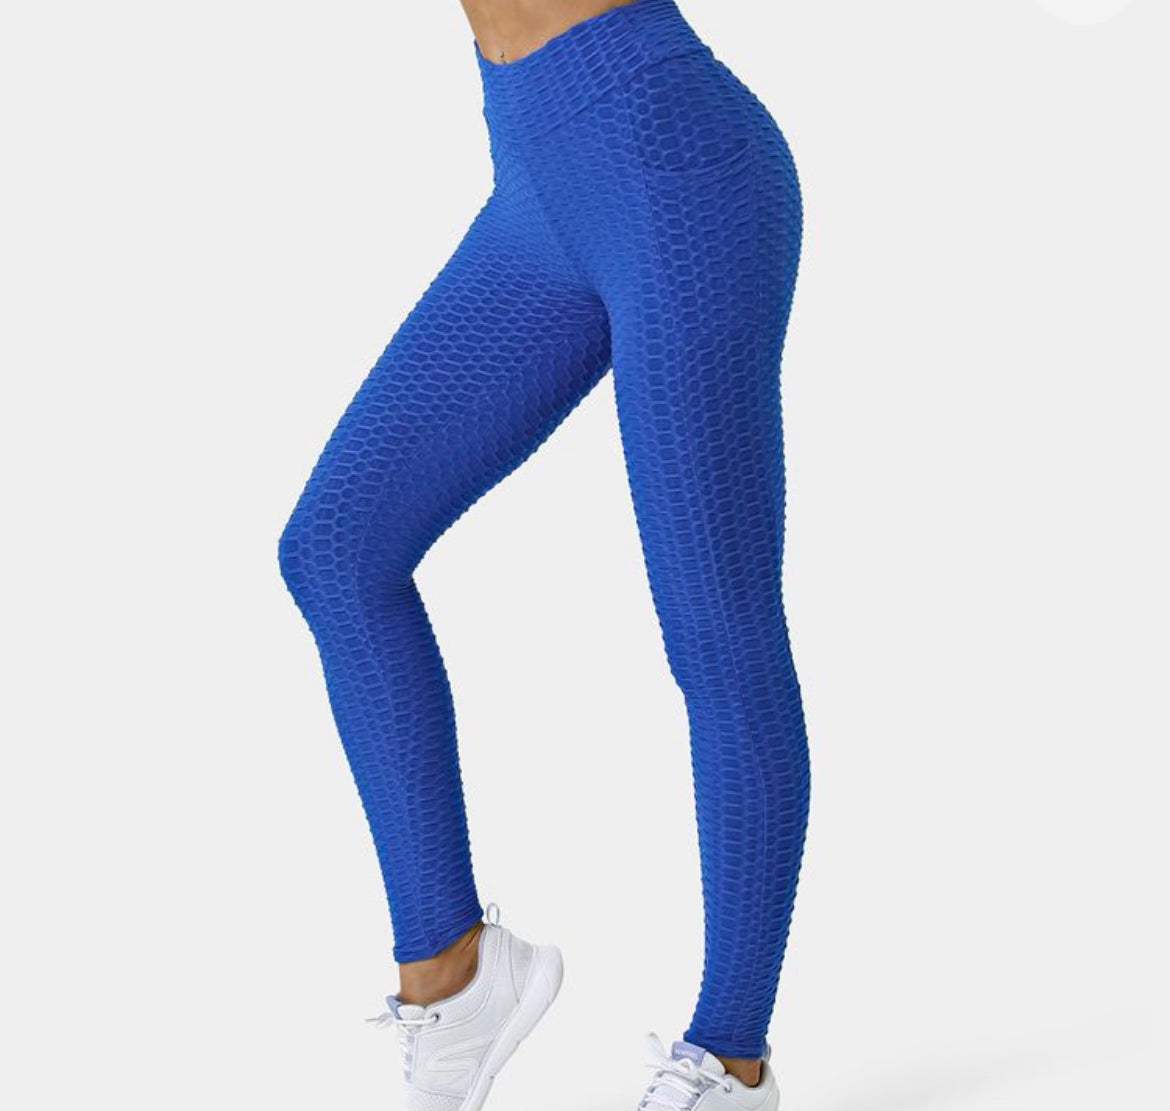 HONEYCOMB LEGGINGS WITH POCKETS - Sleek And Neat